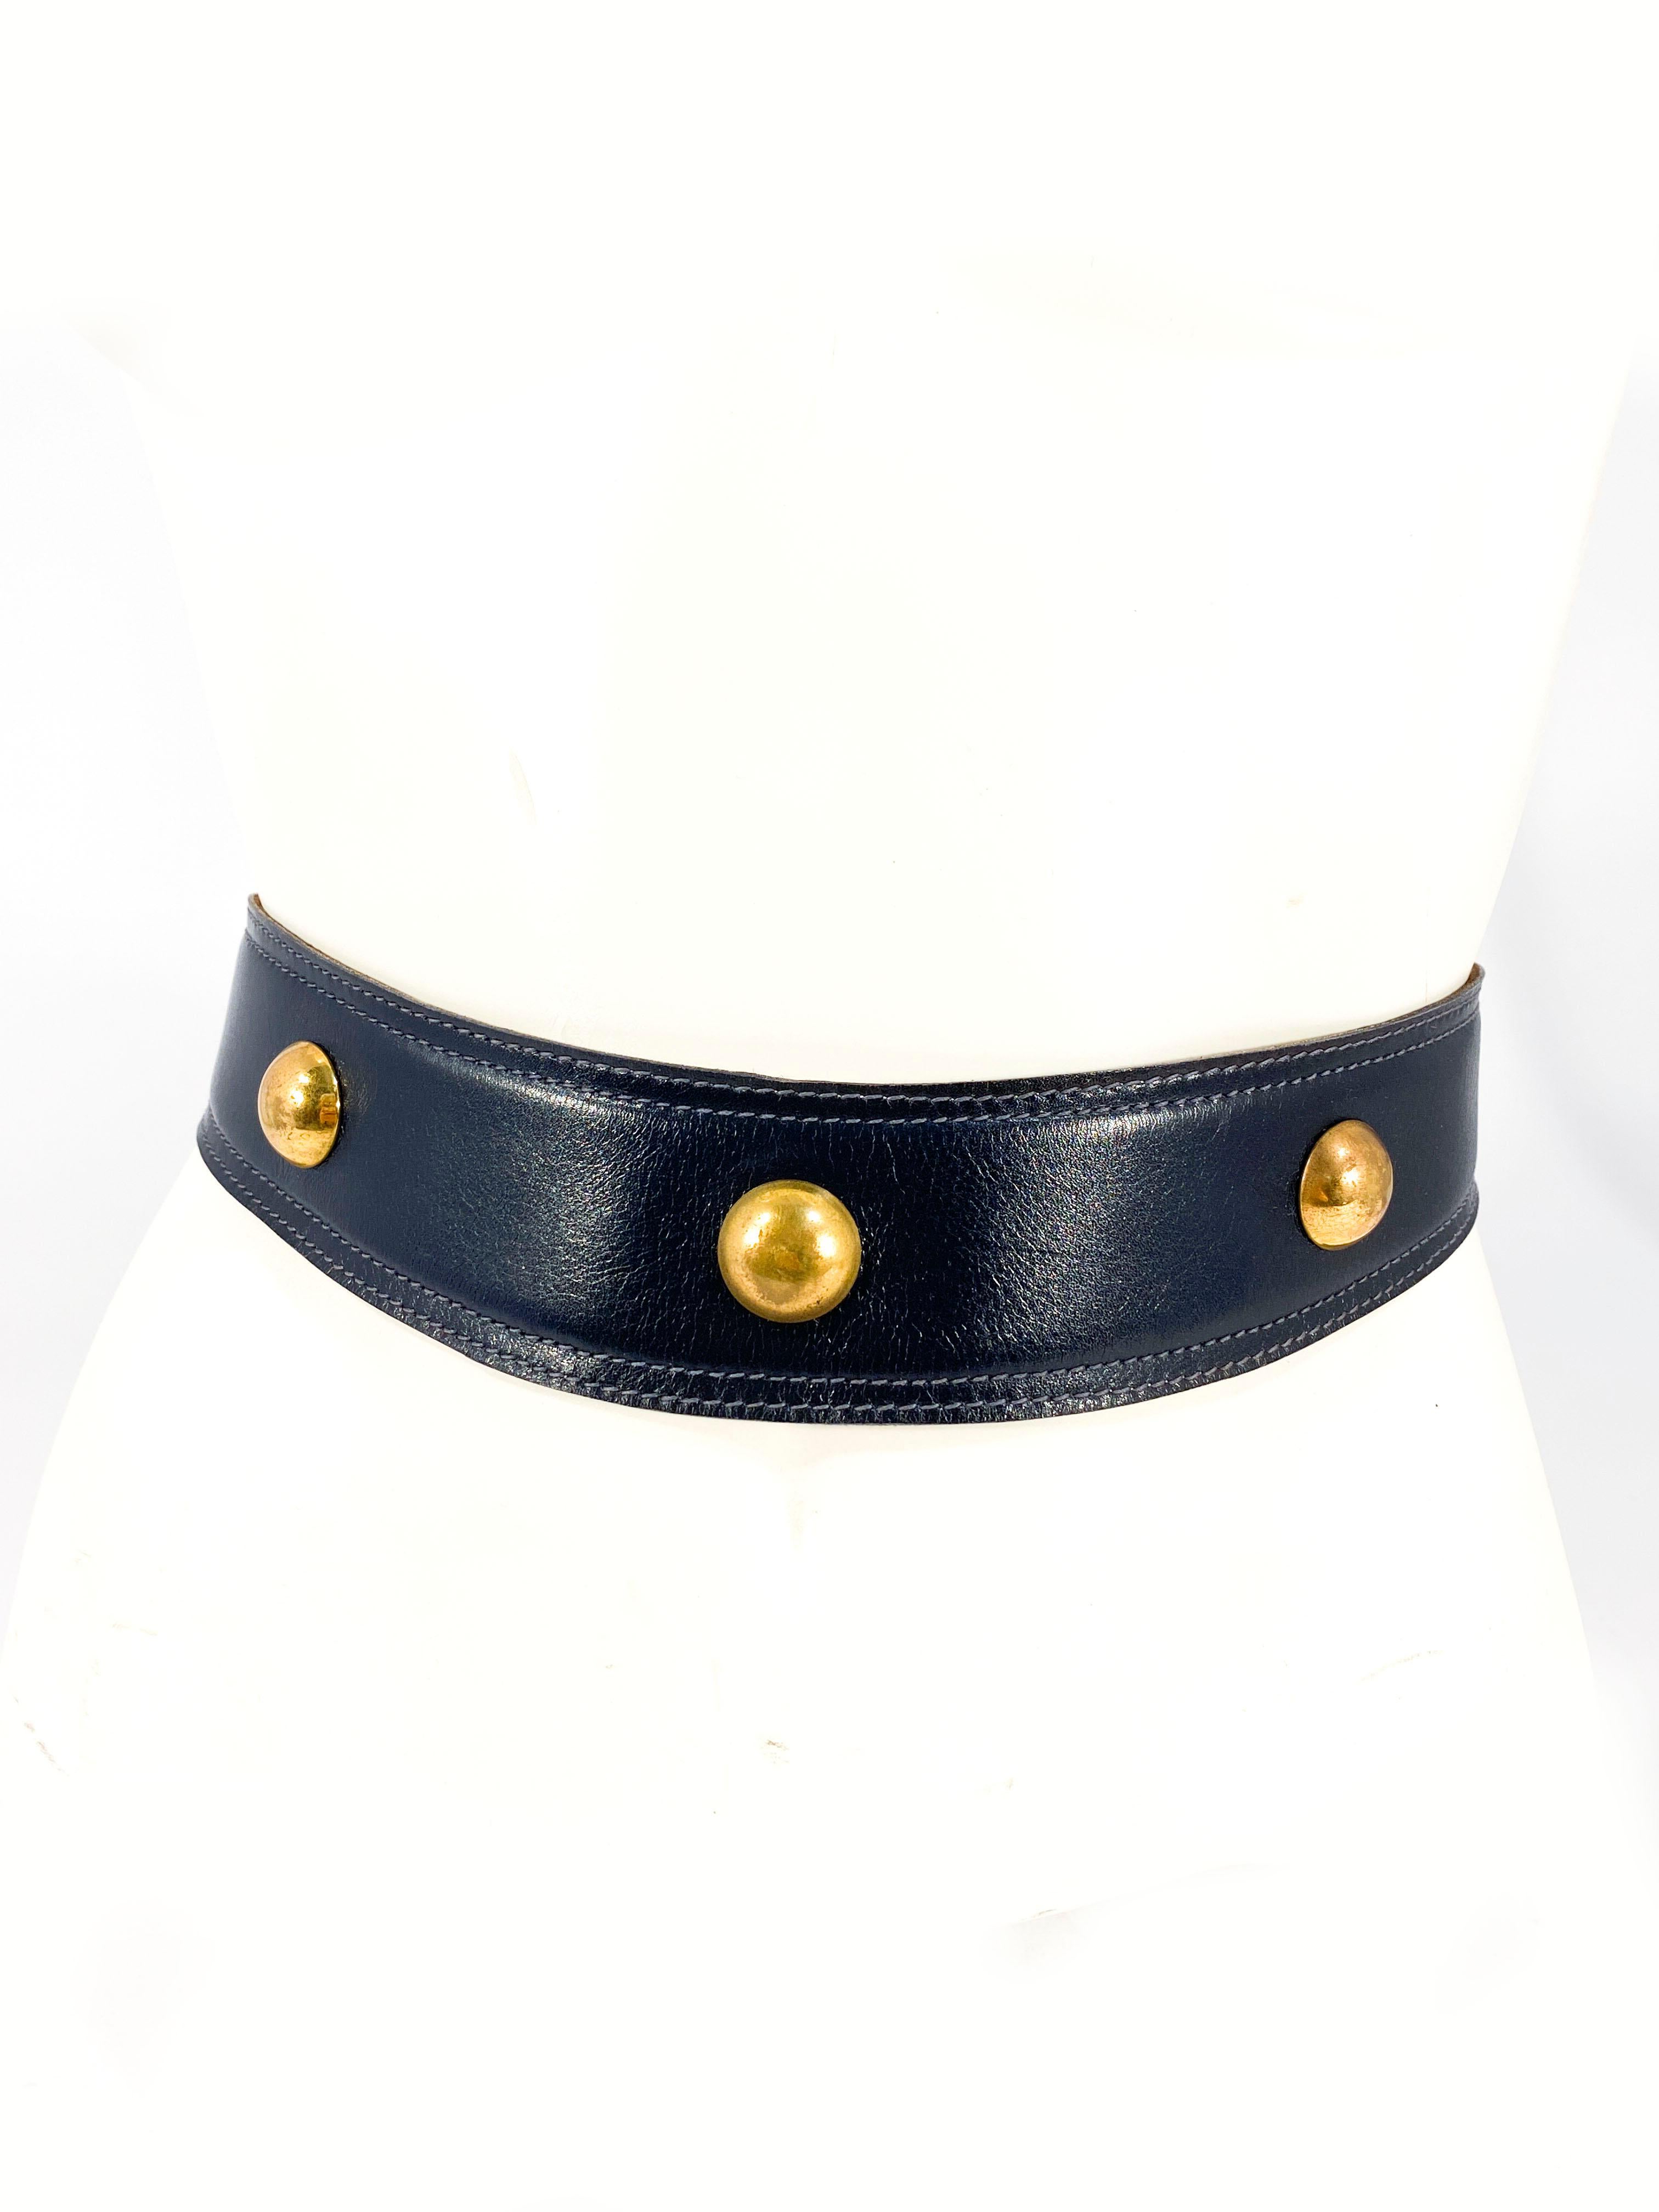 1950s Navy Leather Belt with Brass Studs and lined with leather. 